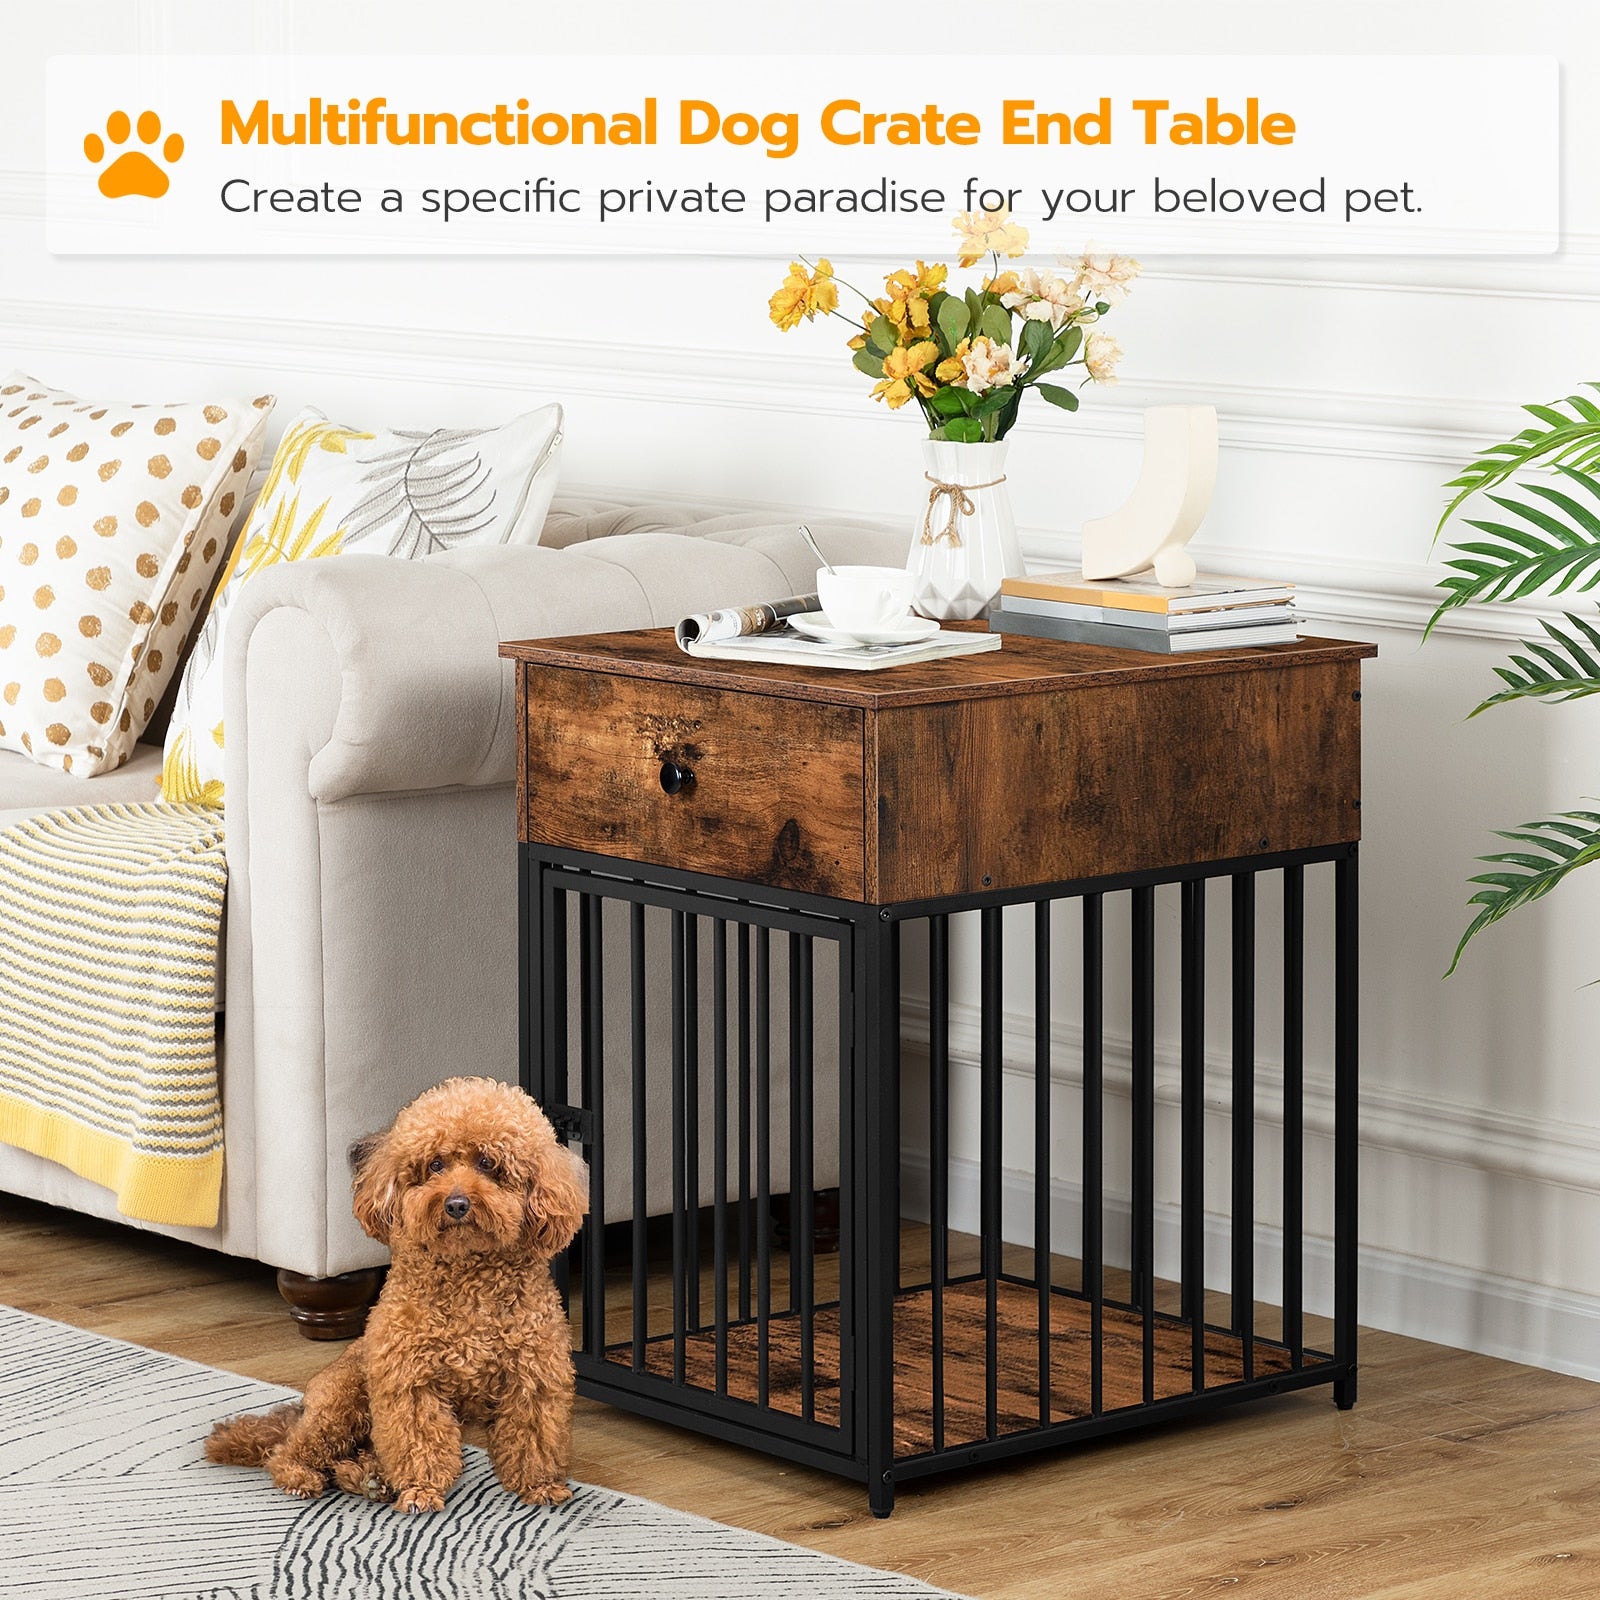 HOOBRO Dog Crate Furniture Wooden Dog Cage Dog House Decorative Dog Kennel with Drawer Indoor Pet Crate End Table for Small Dog